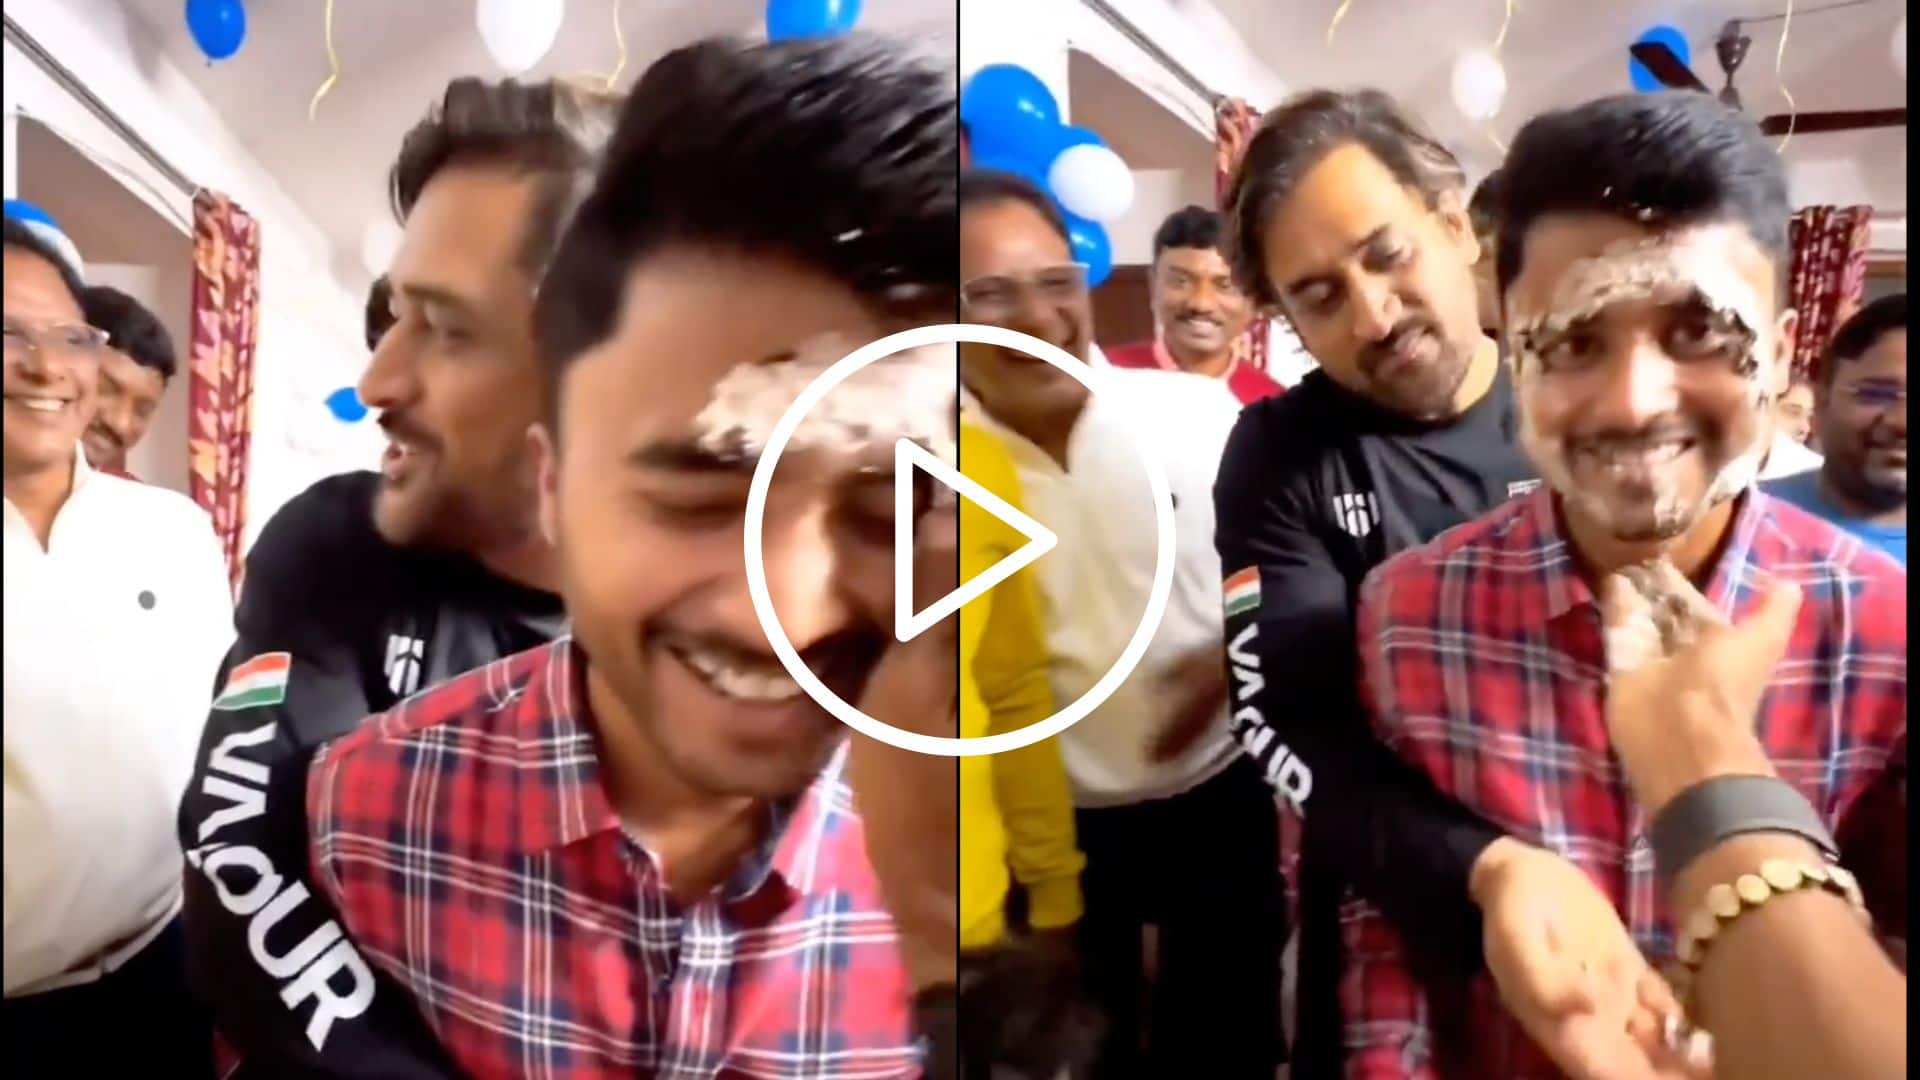 [Watch] MS Dhoni Attends Fan's Birthday Bash, Leaving Him 'Luckiest Man On Earth'